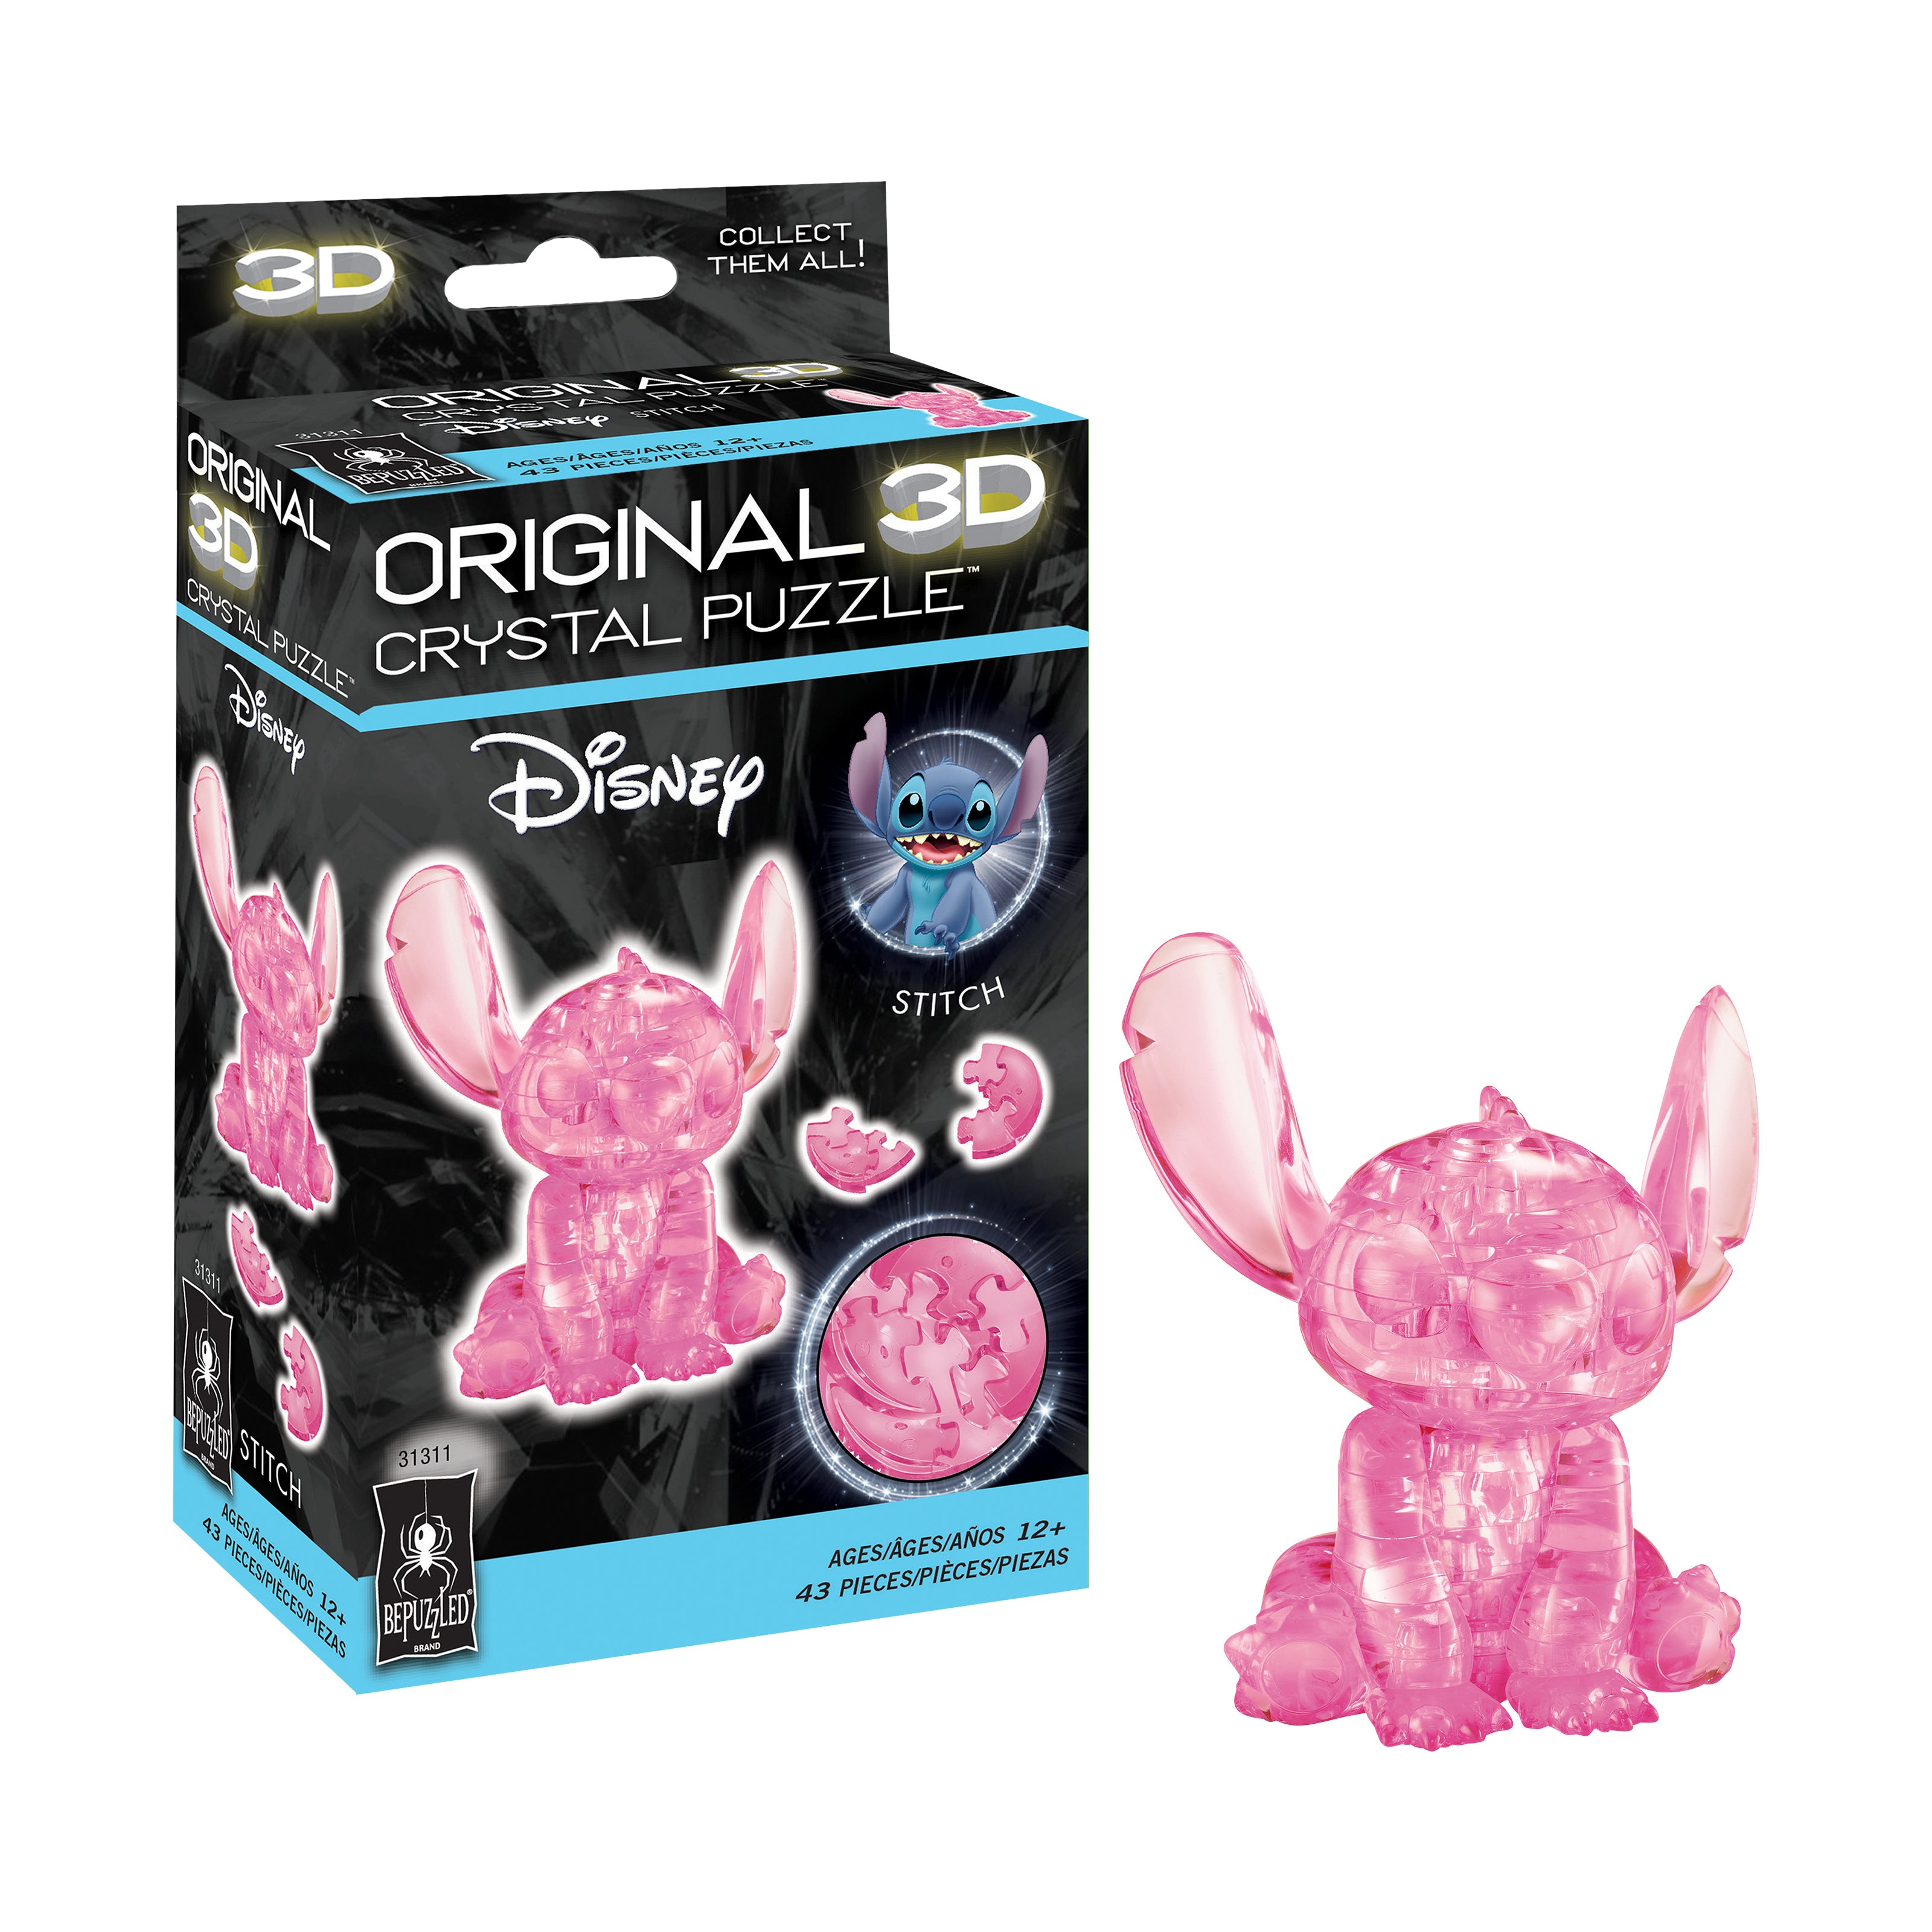 Bepuzzled Disney Stitch Original 3D Crystal Puzzle, Ages 12 and Up